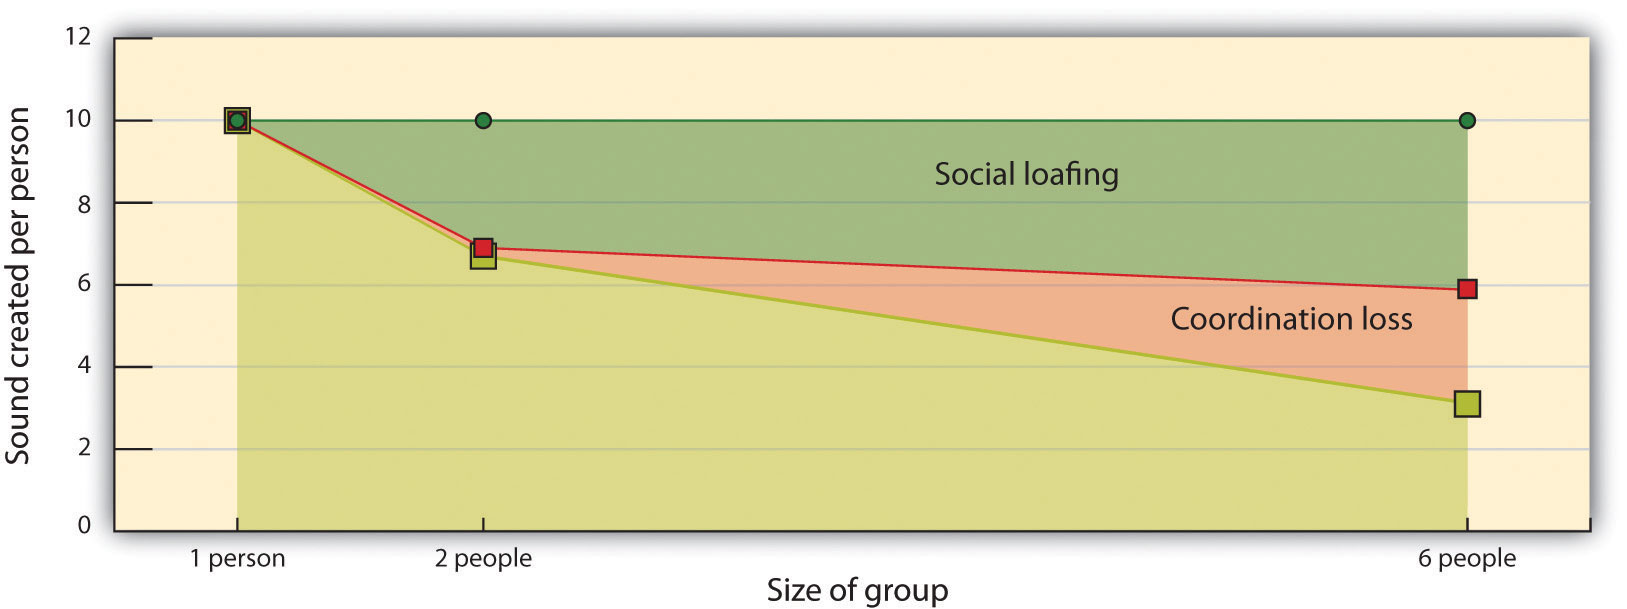 Figure 10.8 Coordination and Motivation Losses in Working Groups